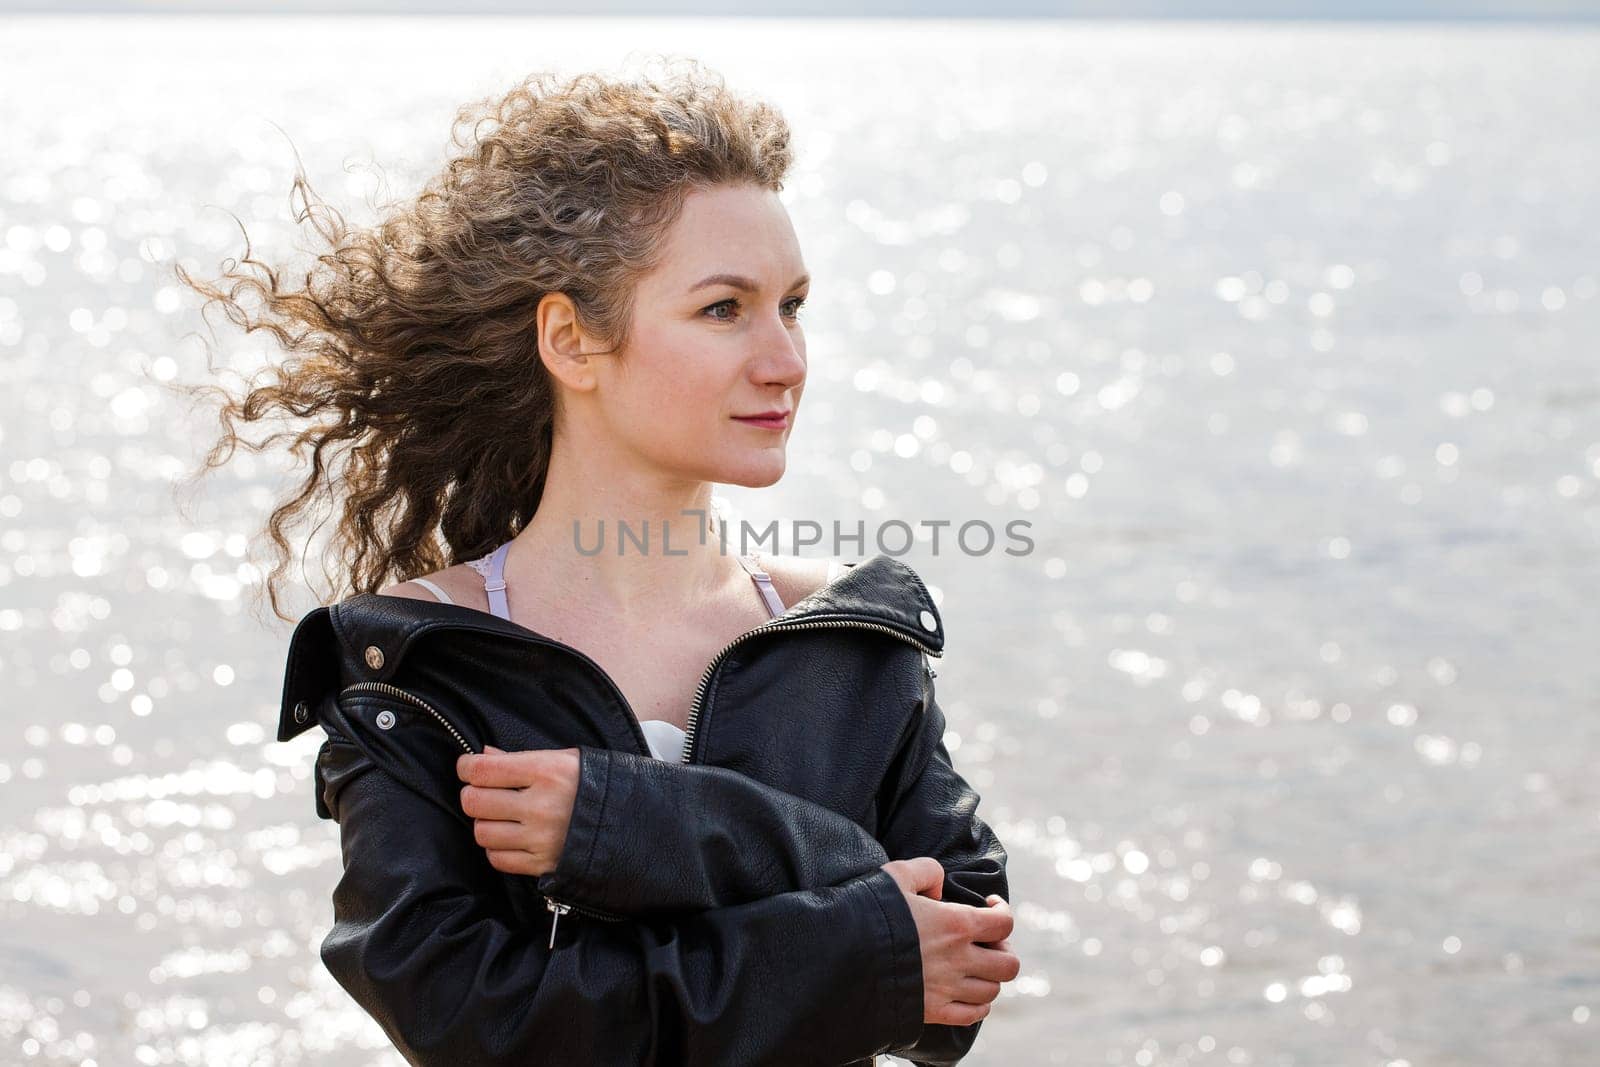 Closeup portrait of a woman, Caucasian woman with curly hair in a black leather jacket looks to the side on the shore against the background of water